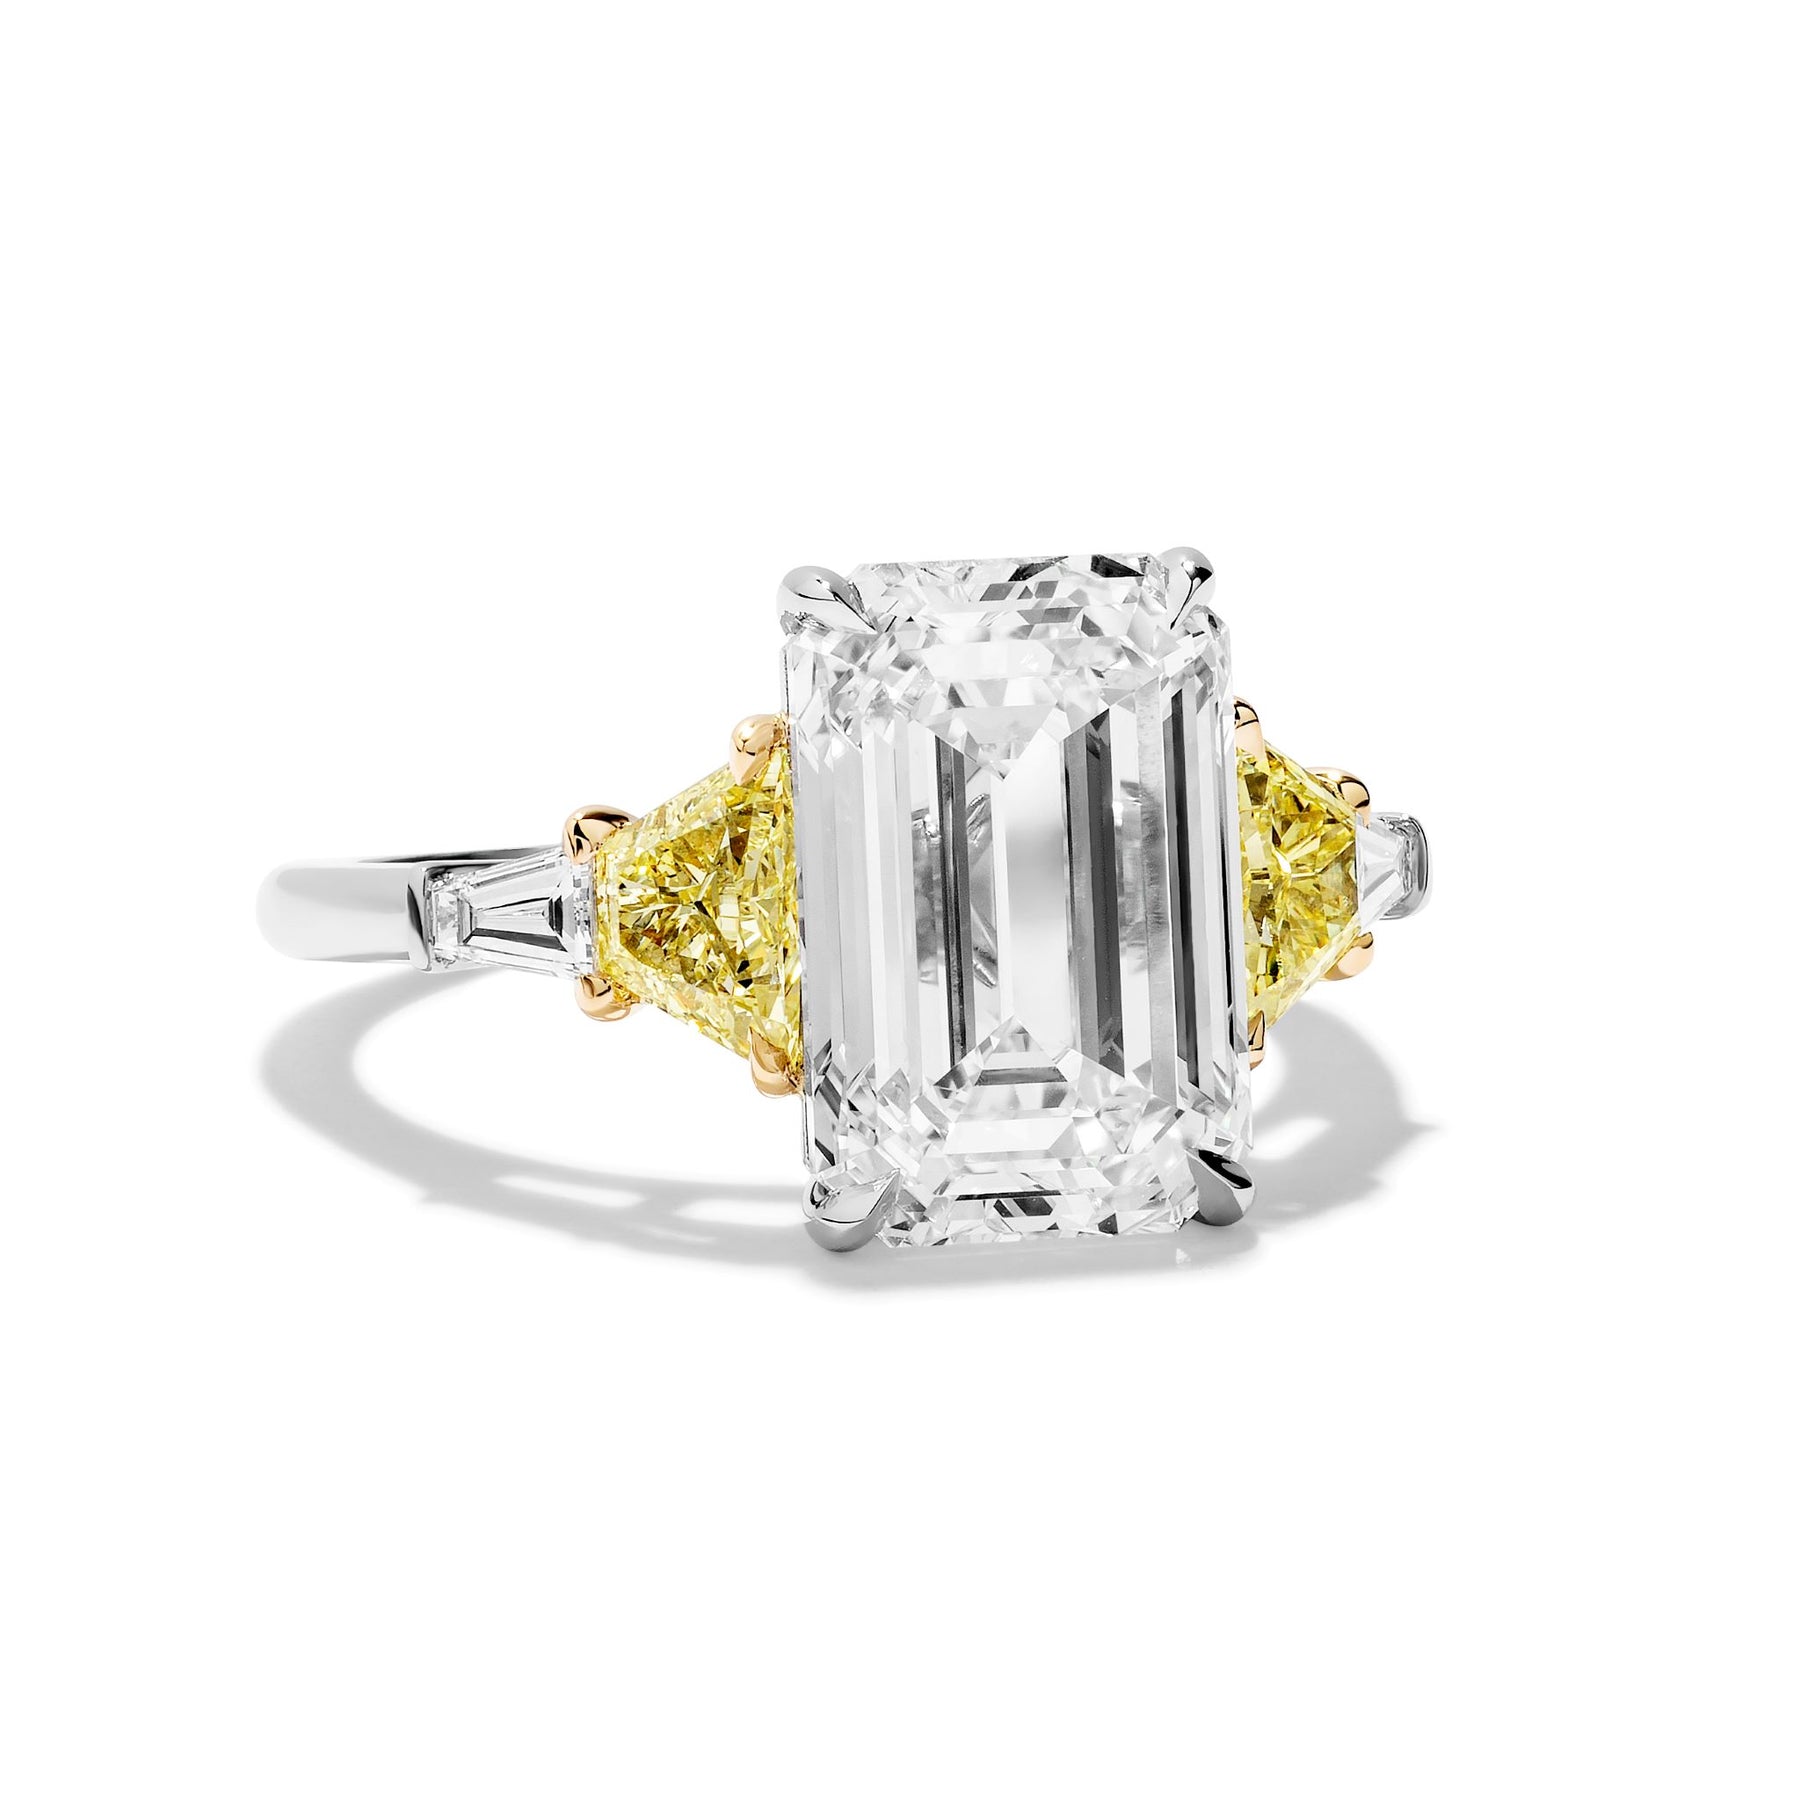 Emerald Cut Diamond Engagement Ring with Fancy Yellow Trapezoid and White Tapered Baguette Side Stones